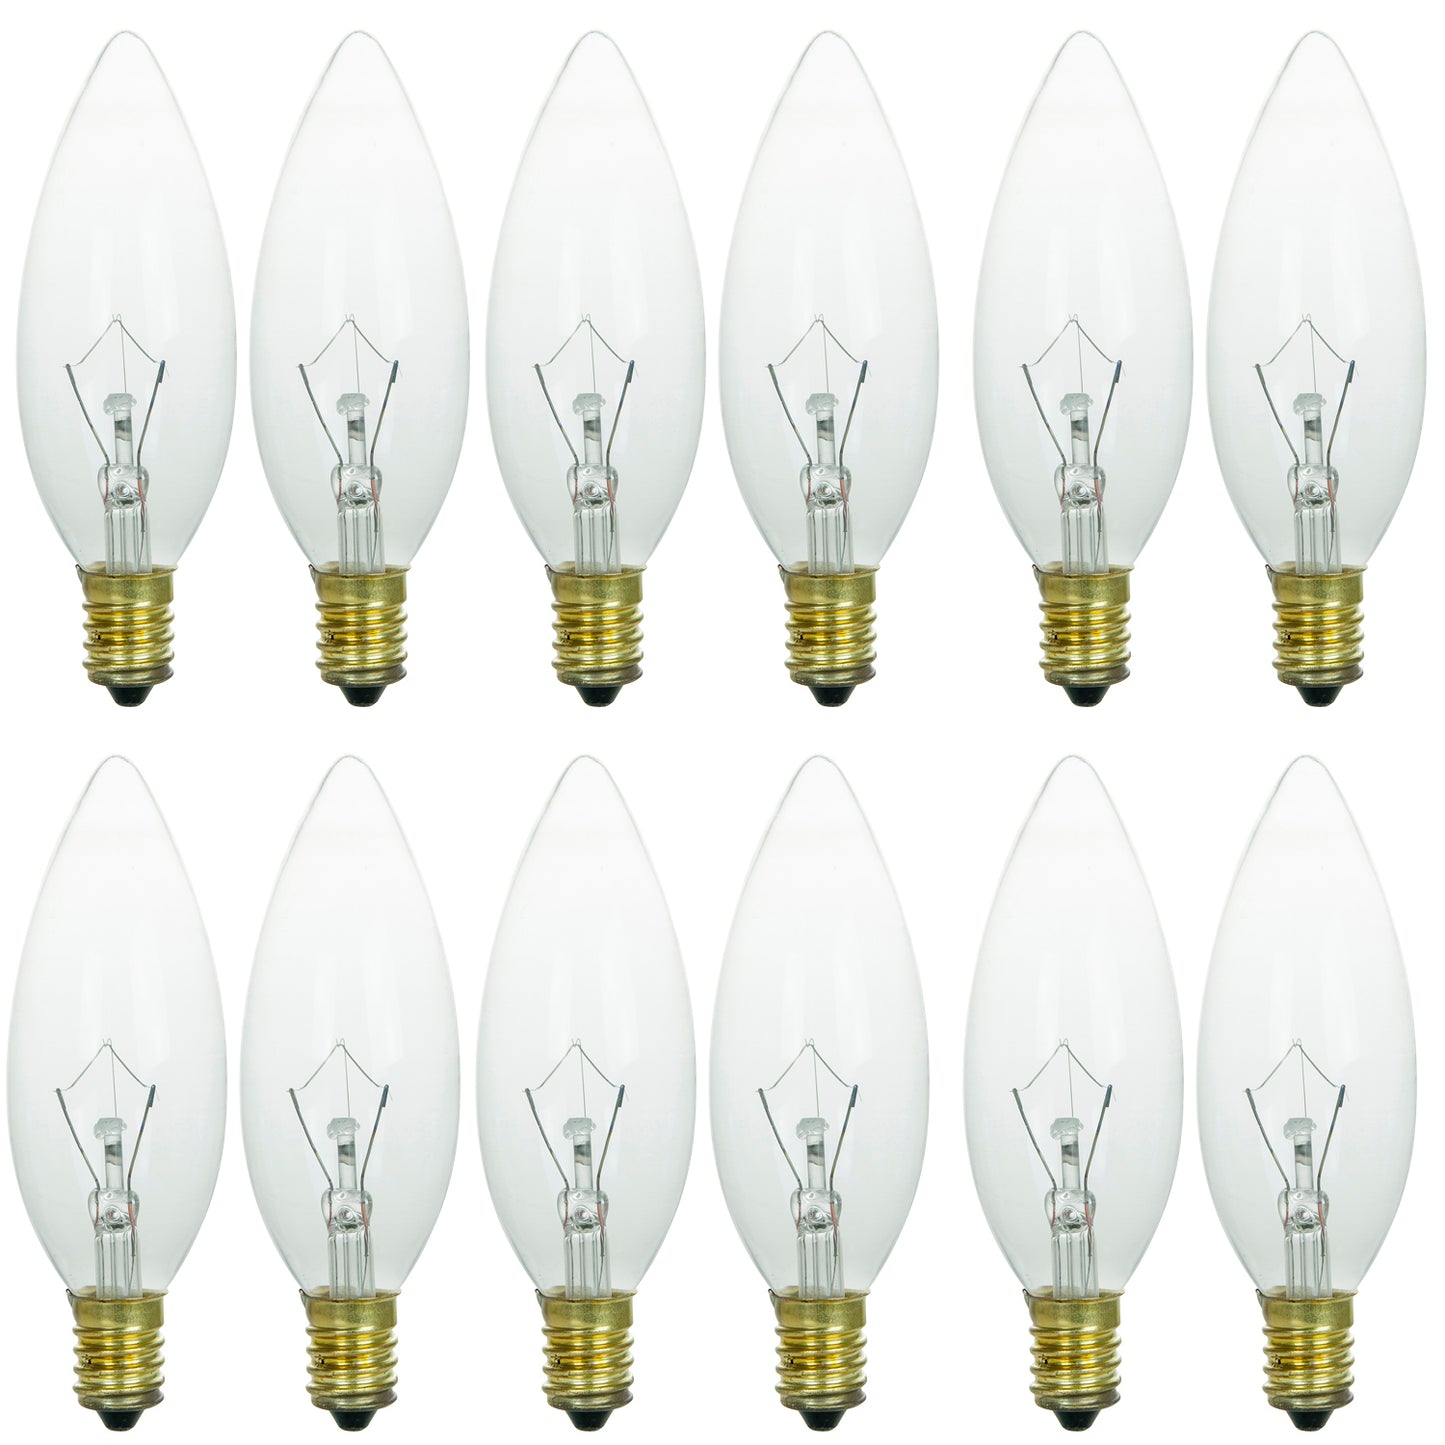 Sunlite 60CTC/32/E14/12PK 60W Incandescent Torpedo Tip Chandelier with Crystal Clear Light Bulb and European E14 Base (12 Pack)